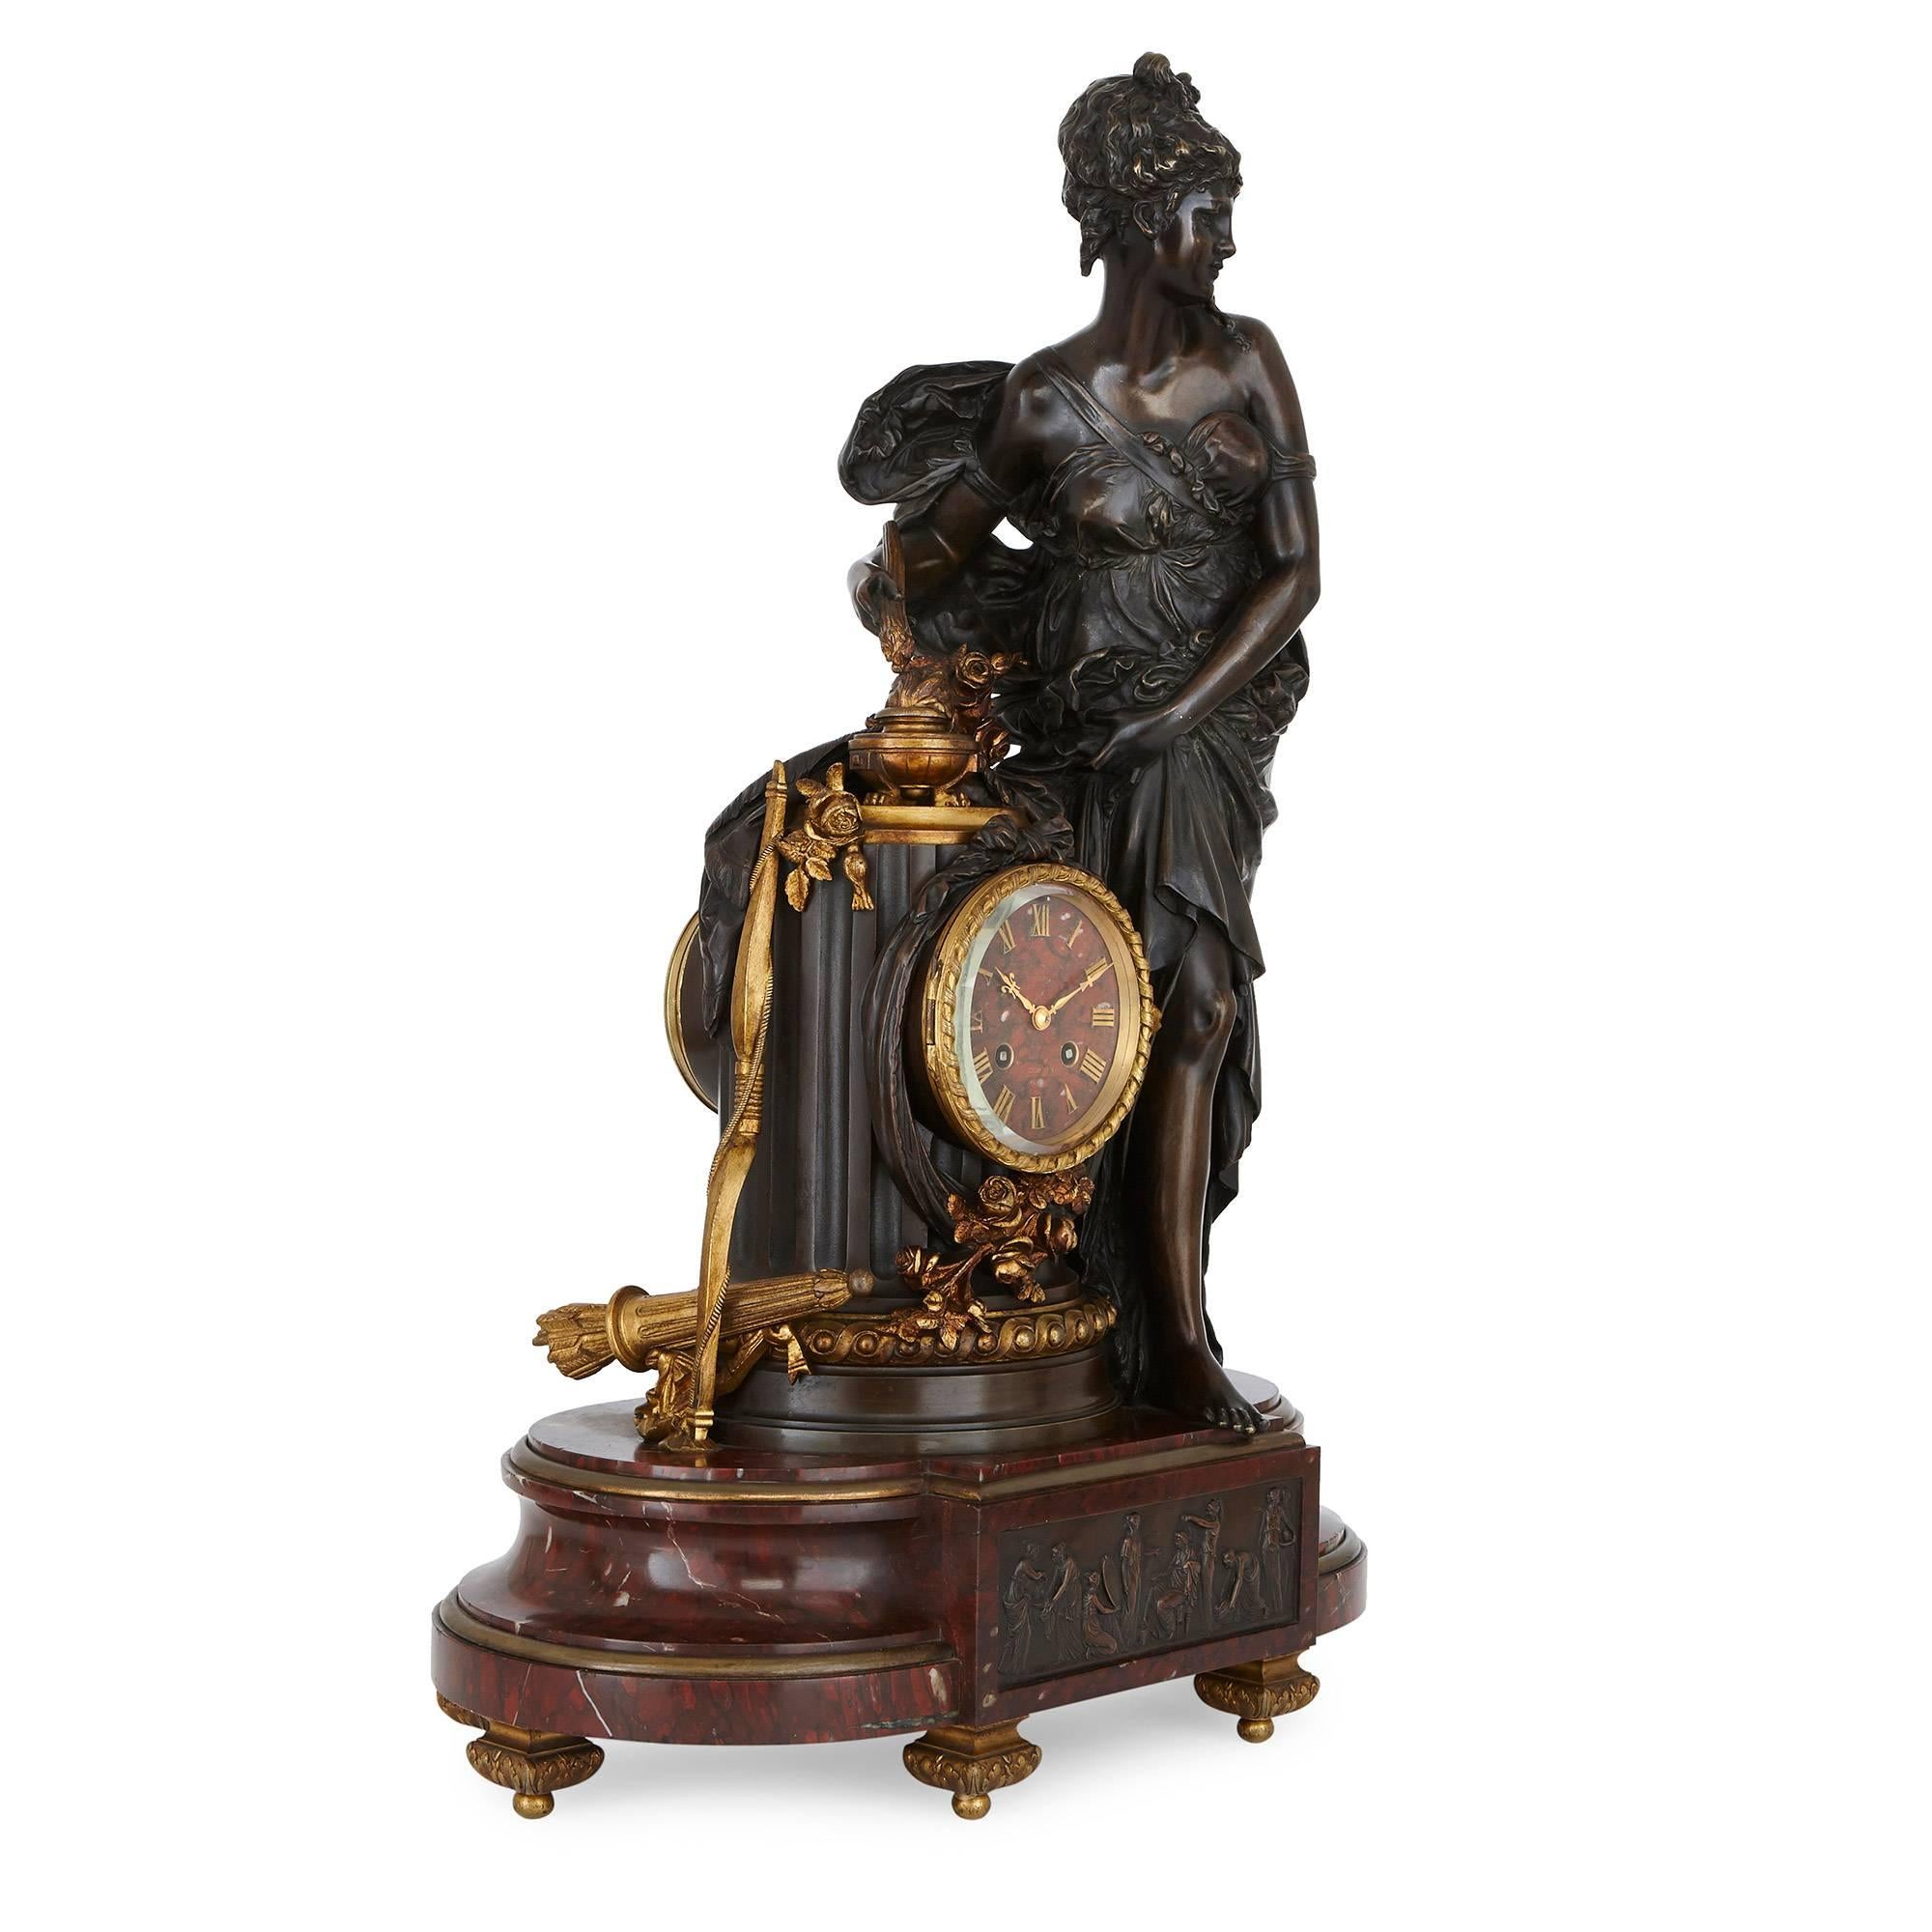 This fine and ornate antique clock set by Lemerle-Charpentier & Compagnie comprises a clock and two flanking candelabra. The asymmetrical clock is set on a red marble base with ormolu feet and features a central relief panel in patinated bronze. The